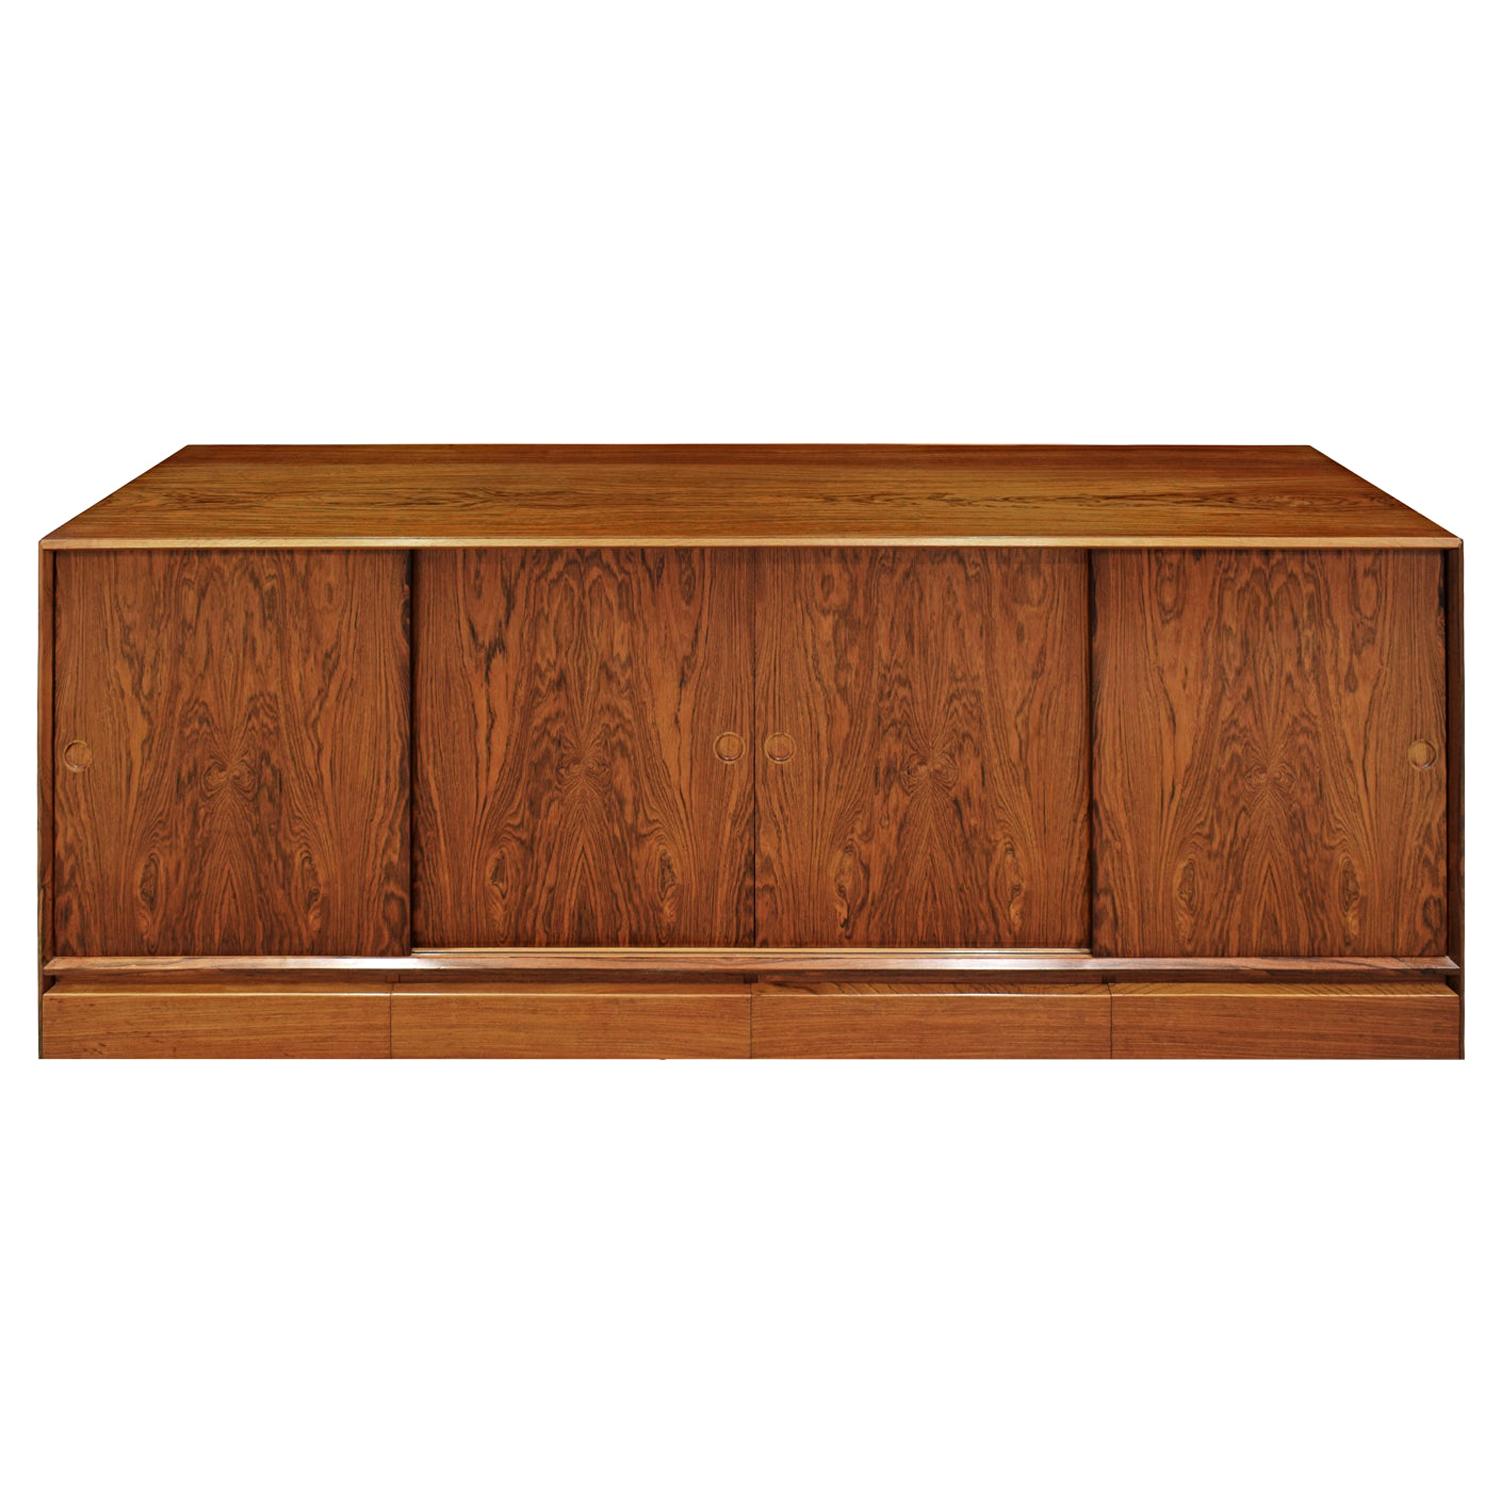 Credenza in Brazilian Rosewood with Inset Pulls 1960s 'Signed' For Sale